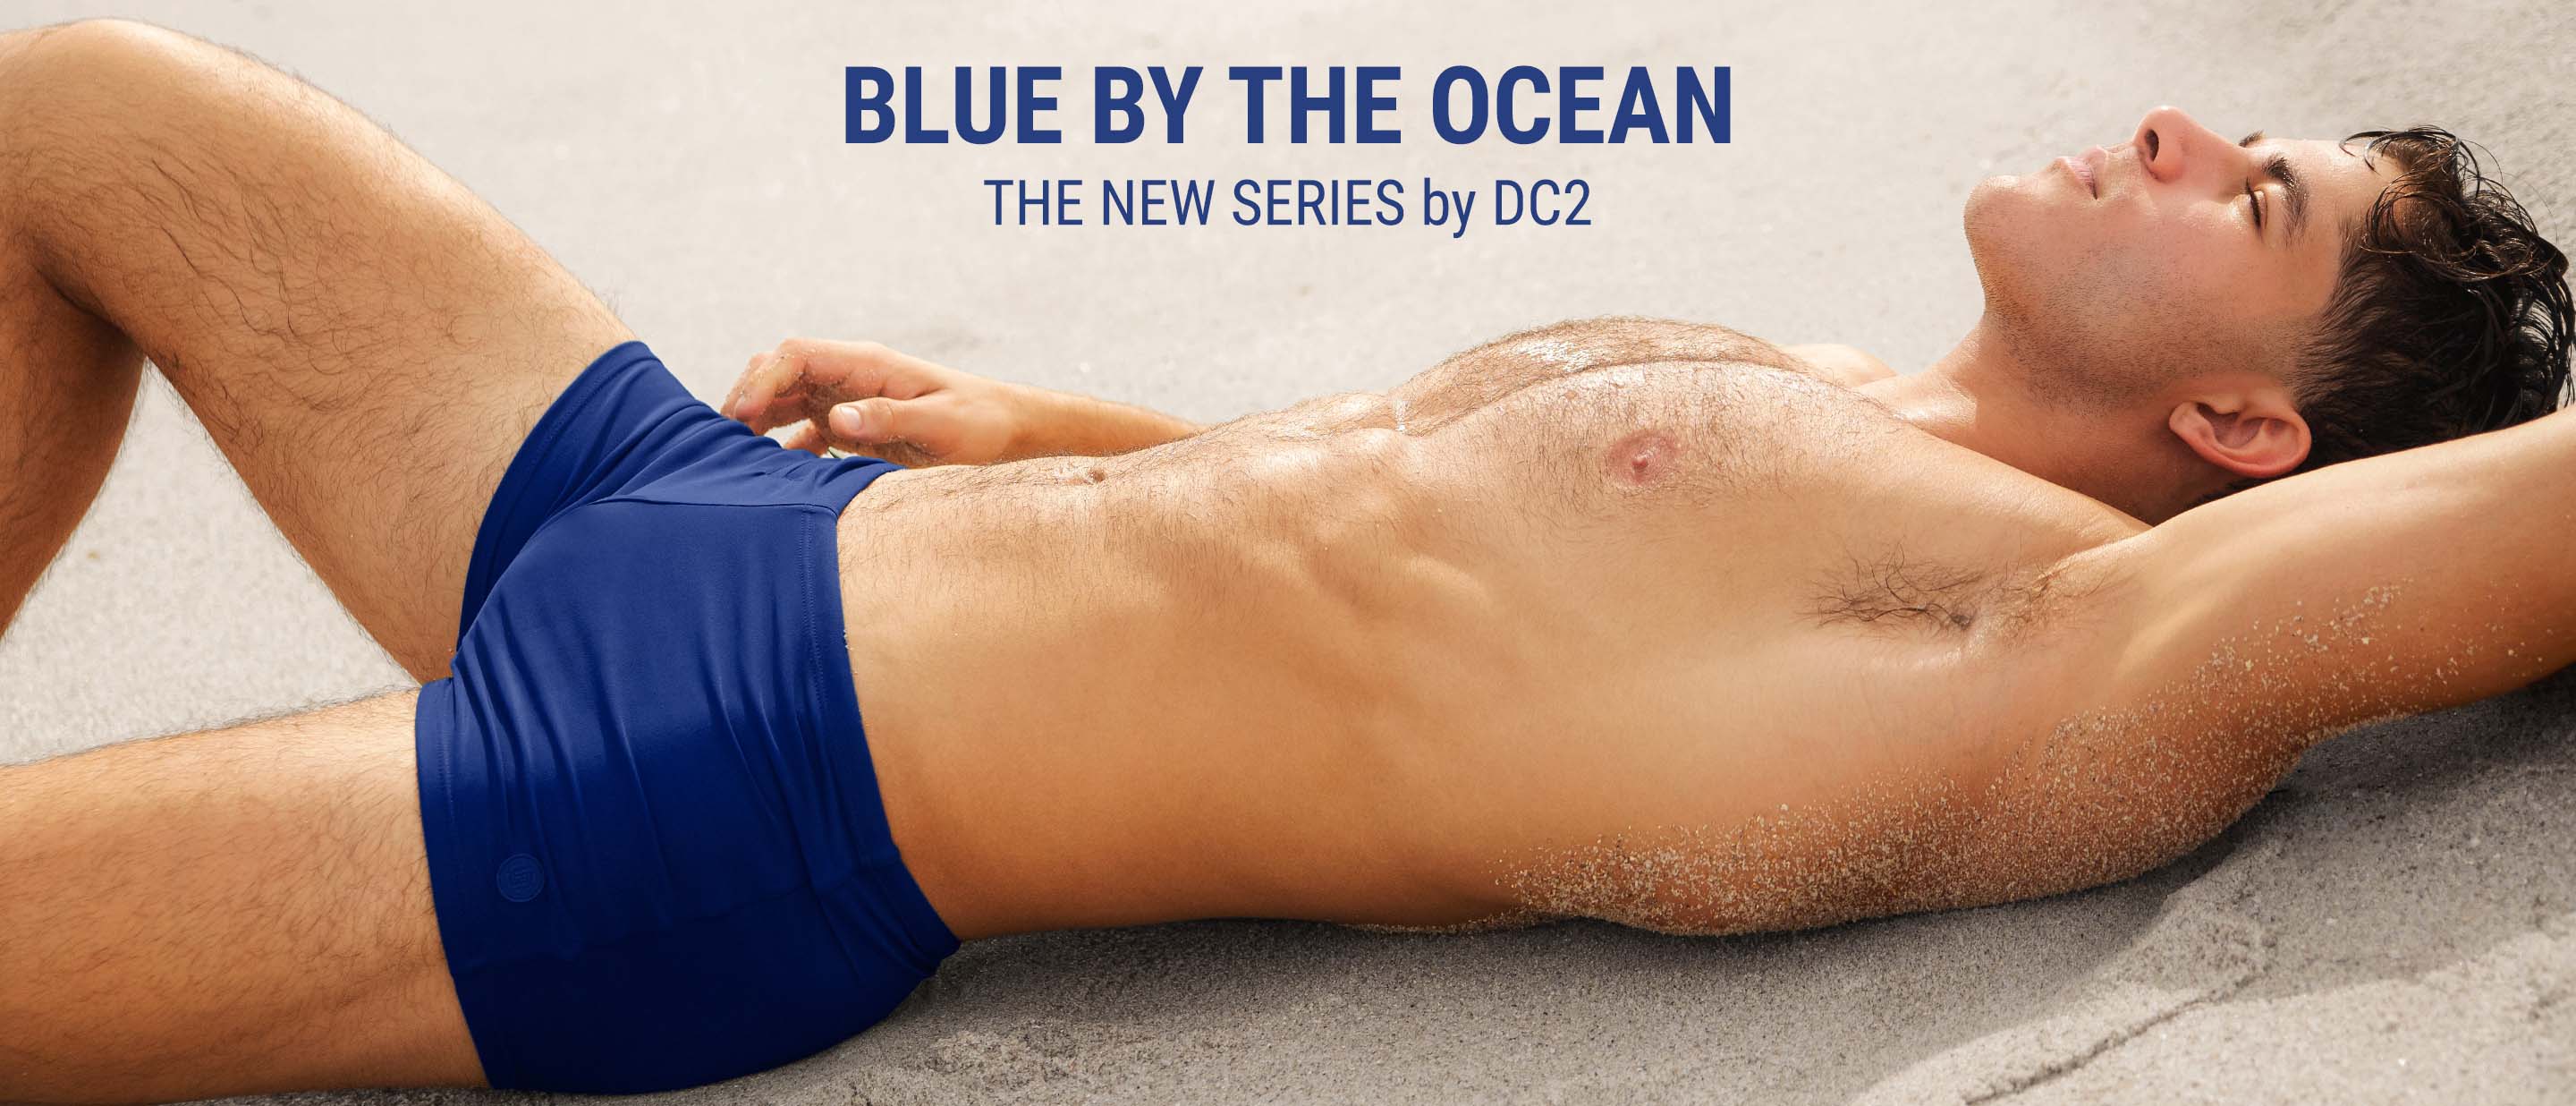 The new BLUE BY THE OCEAN color series for Spring/Summer 2024 from the new DC2 capsule-brand by BANG! Miami. An unbeatable color that will always match greatly with everything. Ready to wear during your finest moments, poolside or by the ocean.